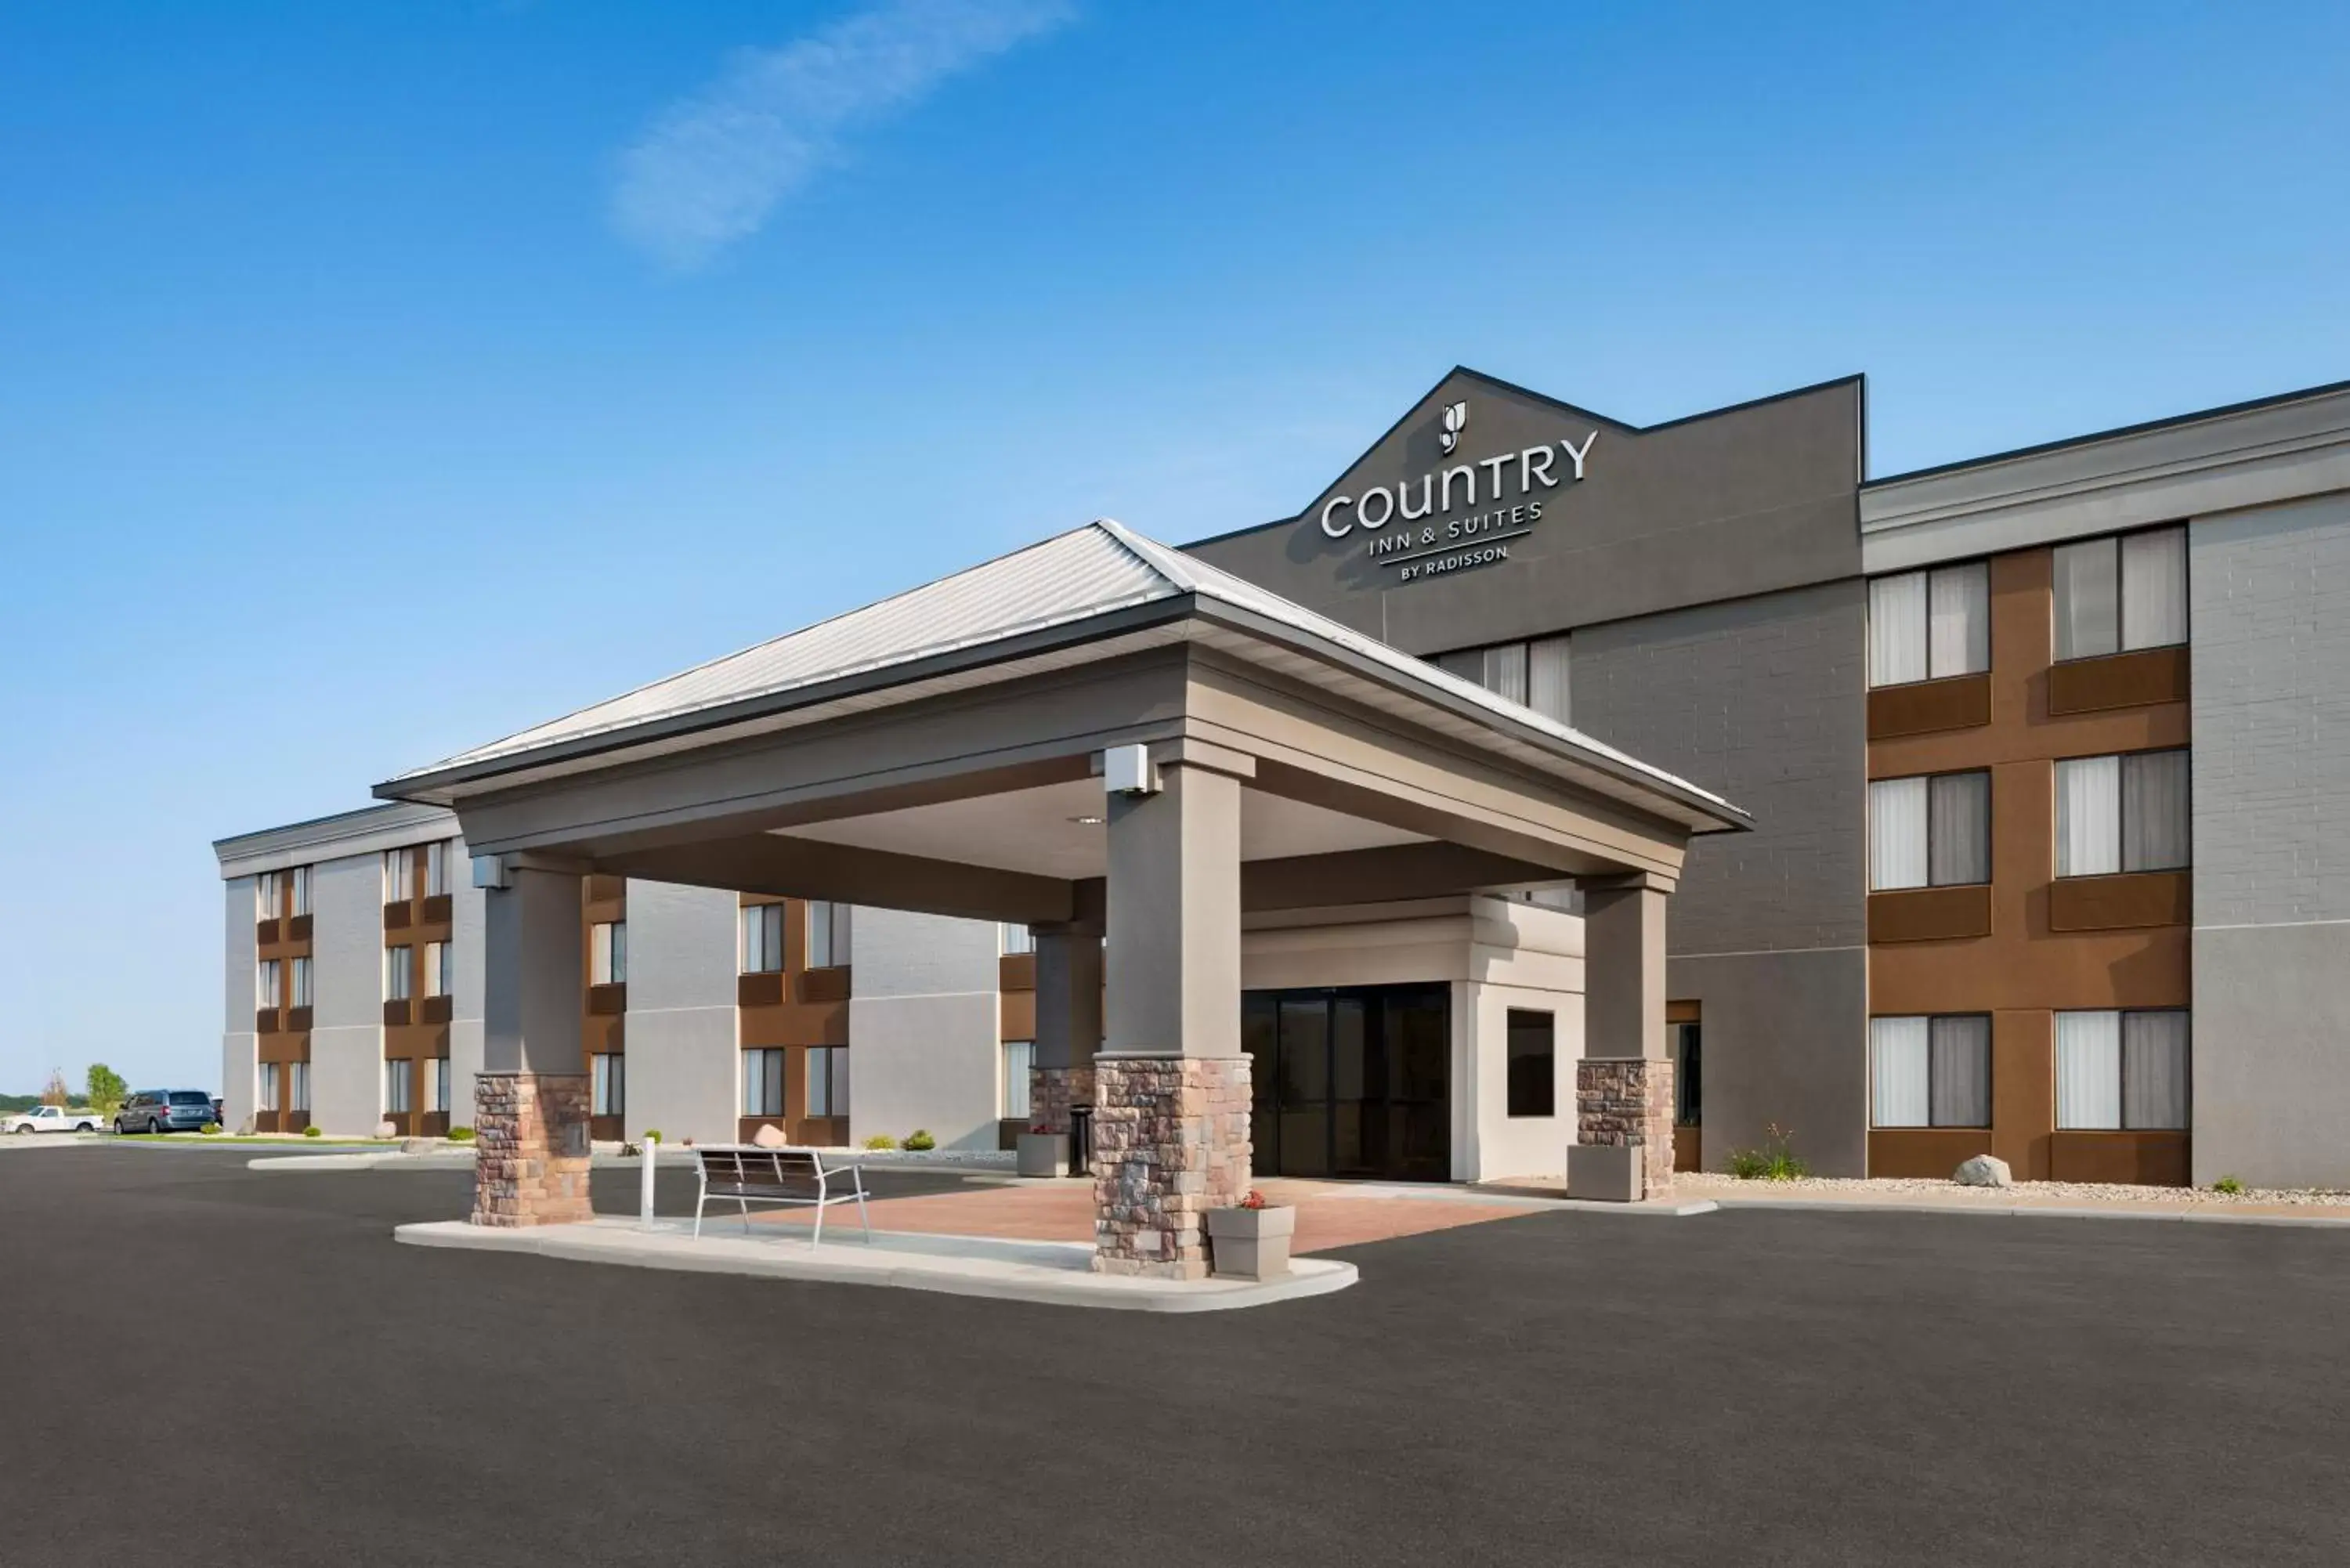 Property building in Country Inn & Suites by Radisson, Mt. Pleasant-Racine West, WI